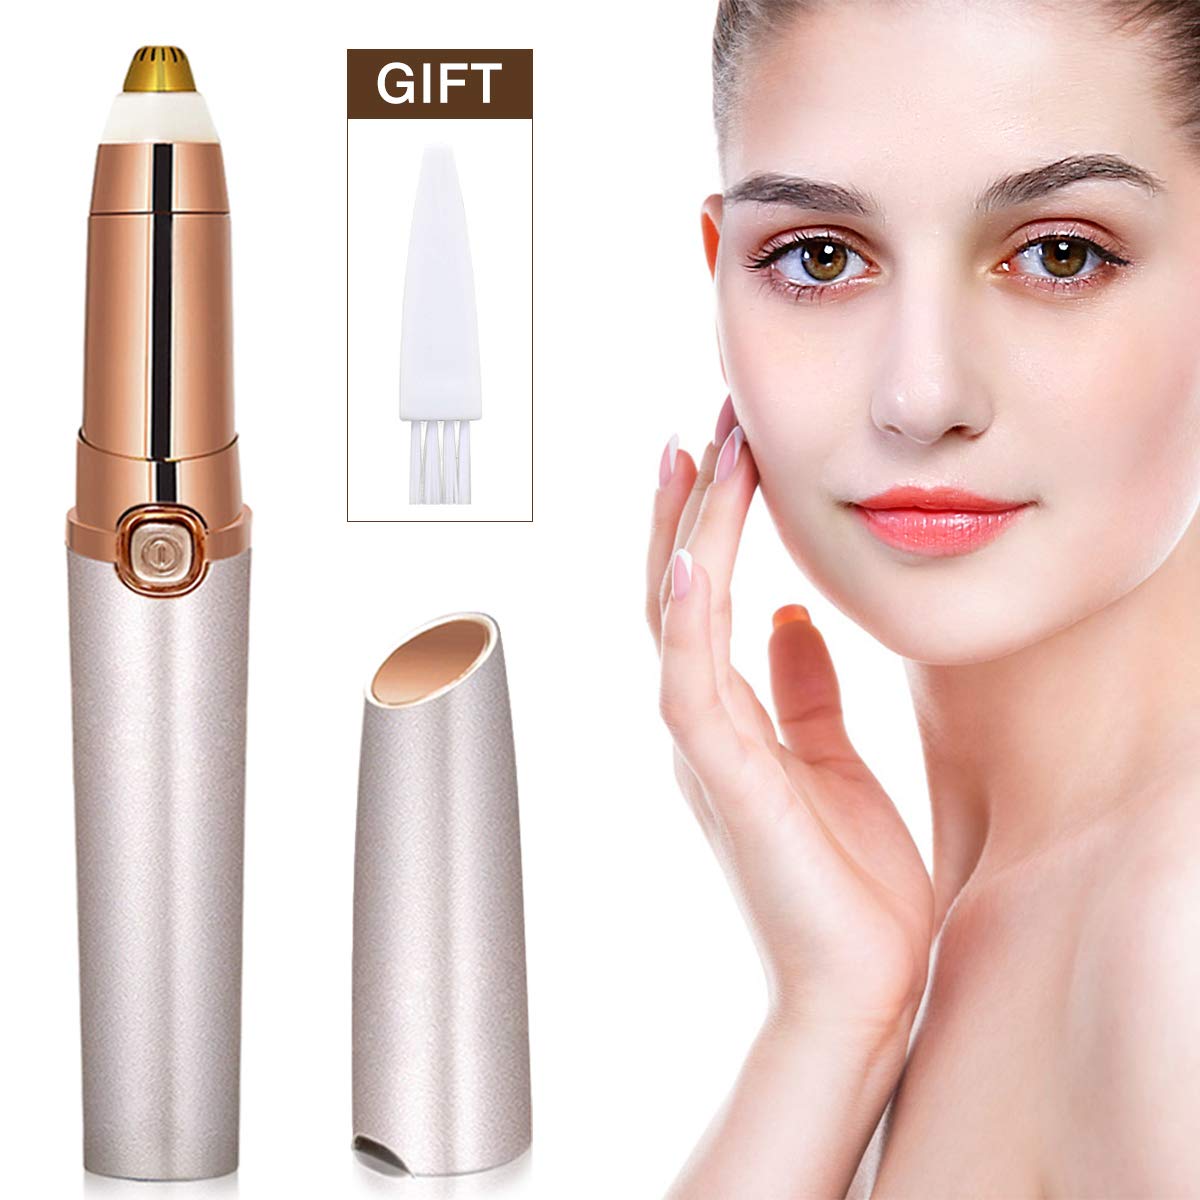 best nose and ear trimmer 2019